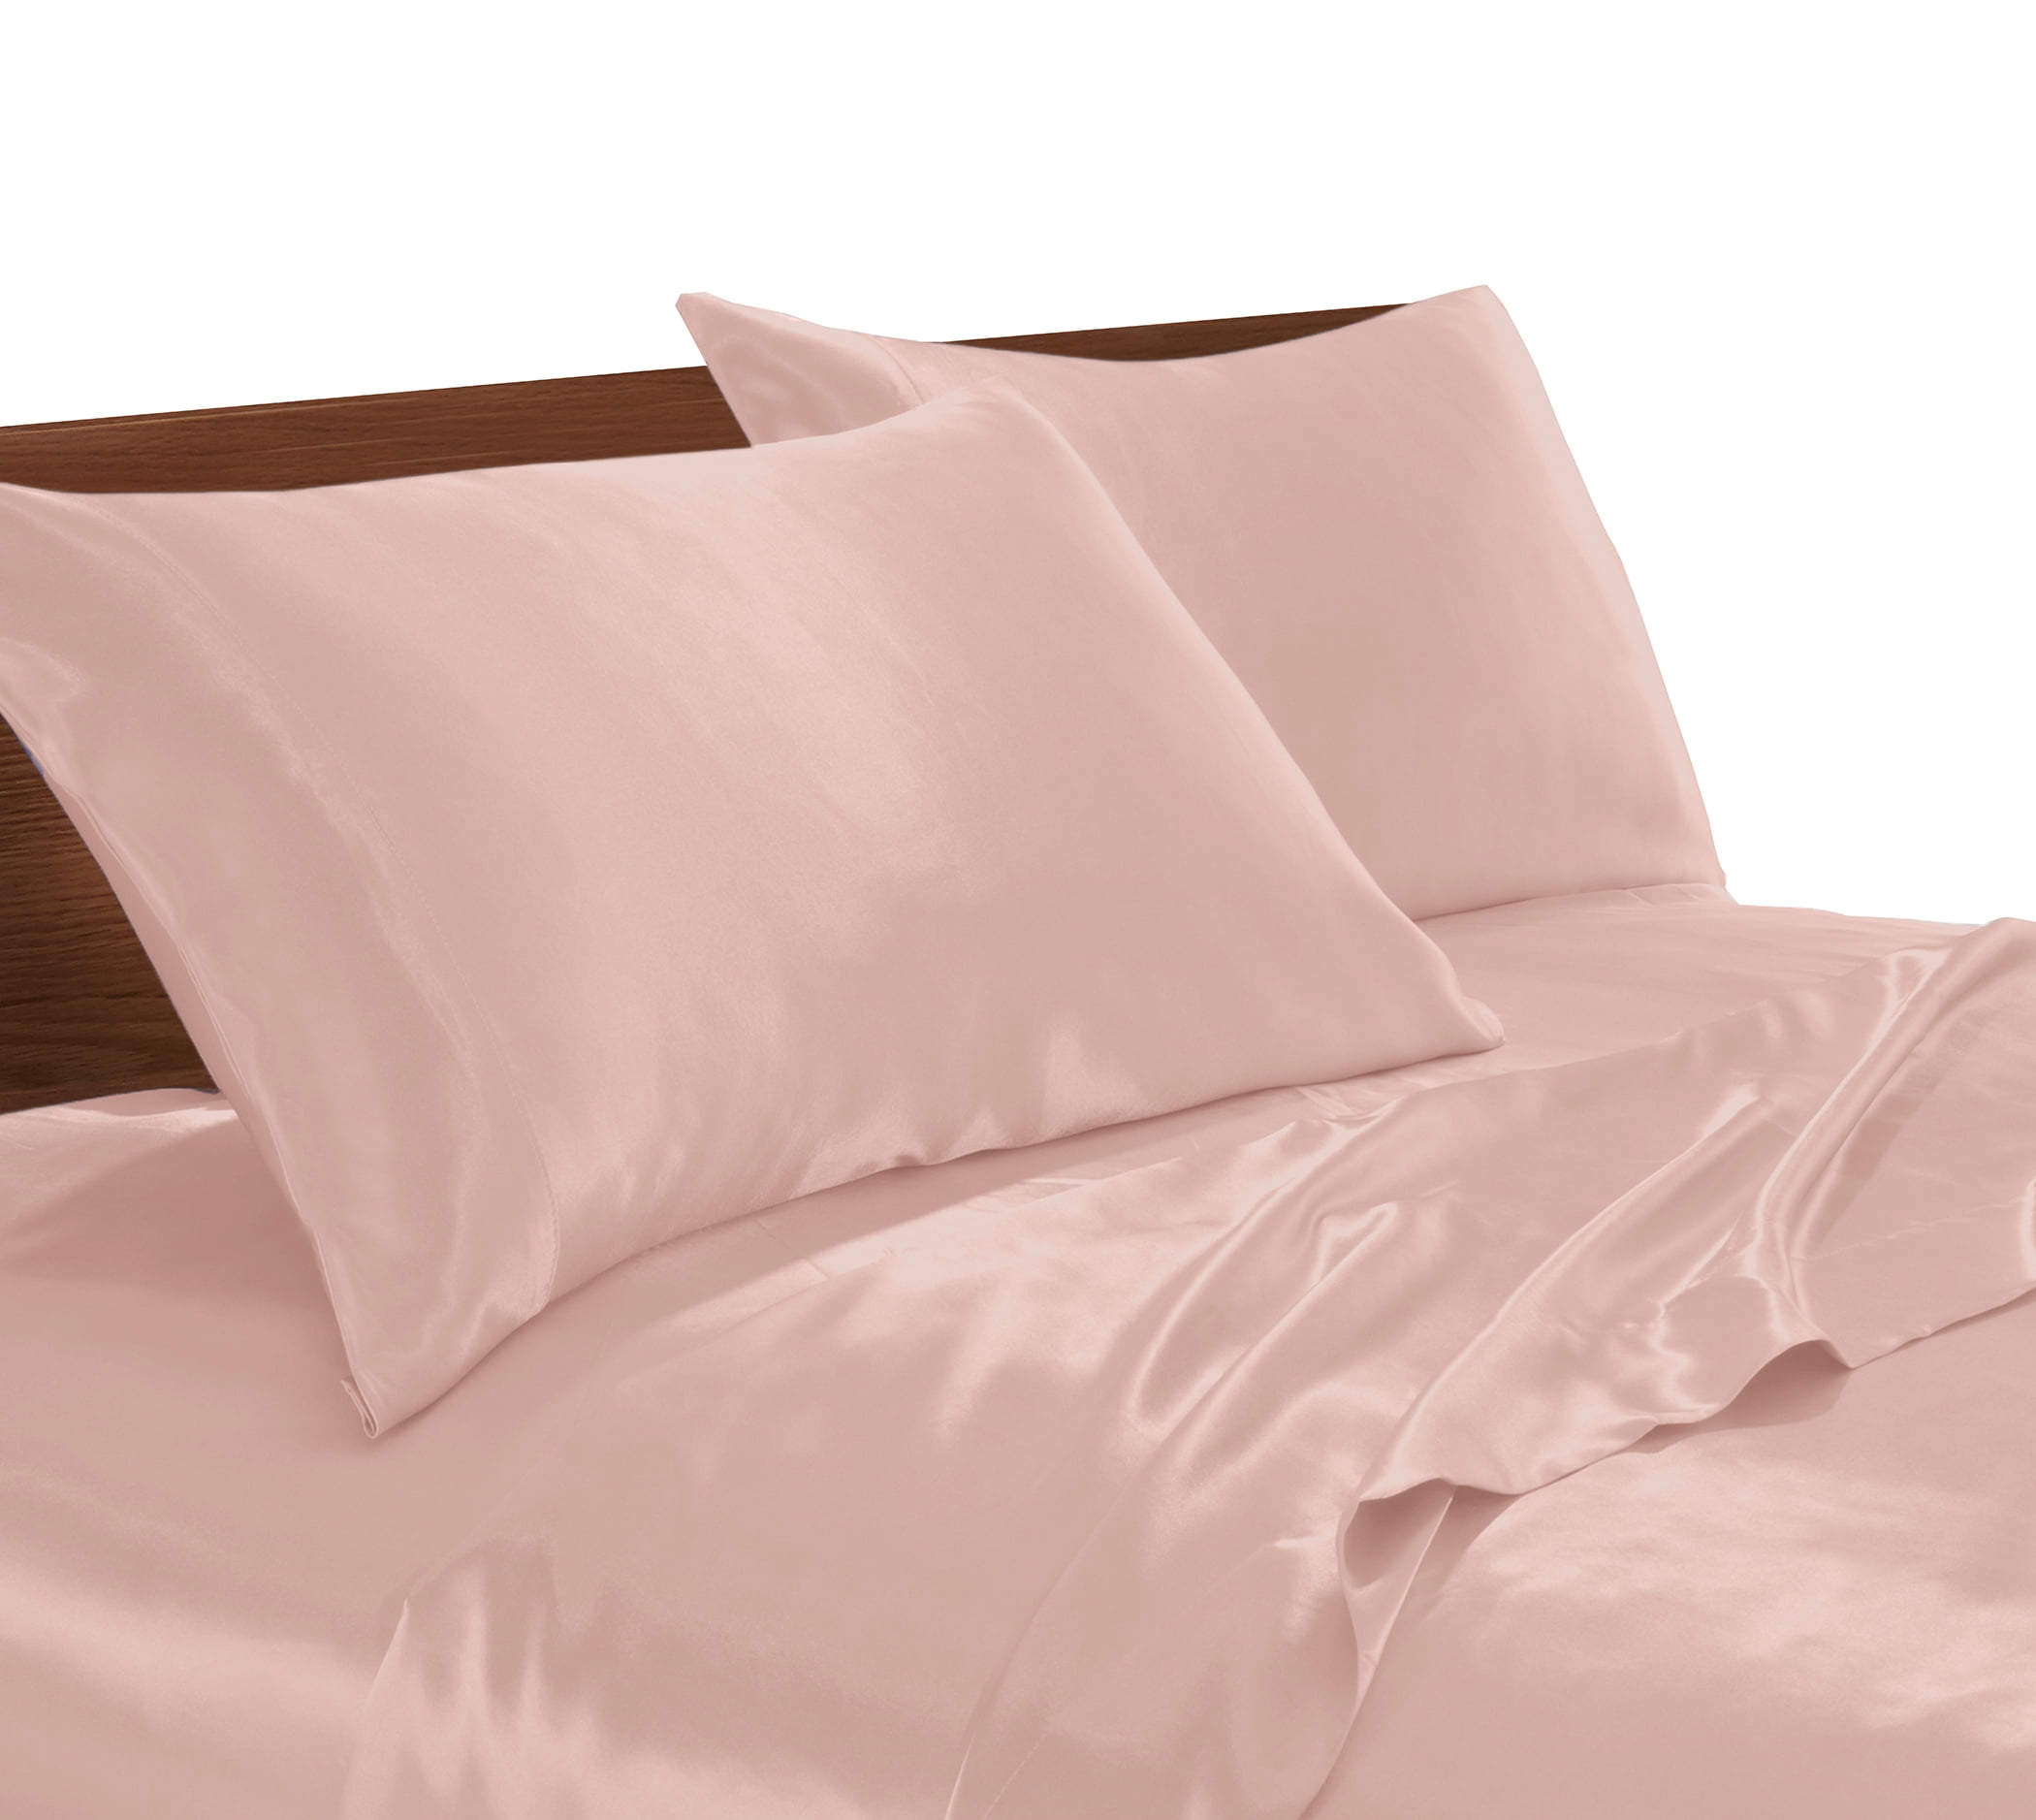 Satin Patch Work Sheets Queen Size Silky Soft Bed Sheets Pink